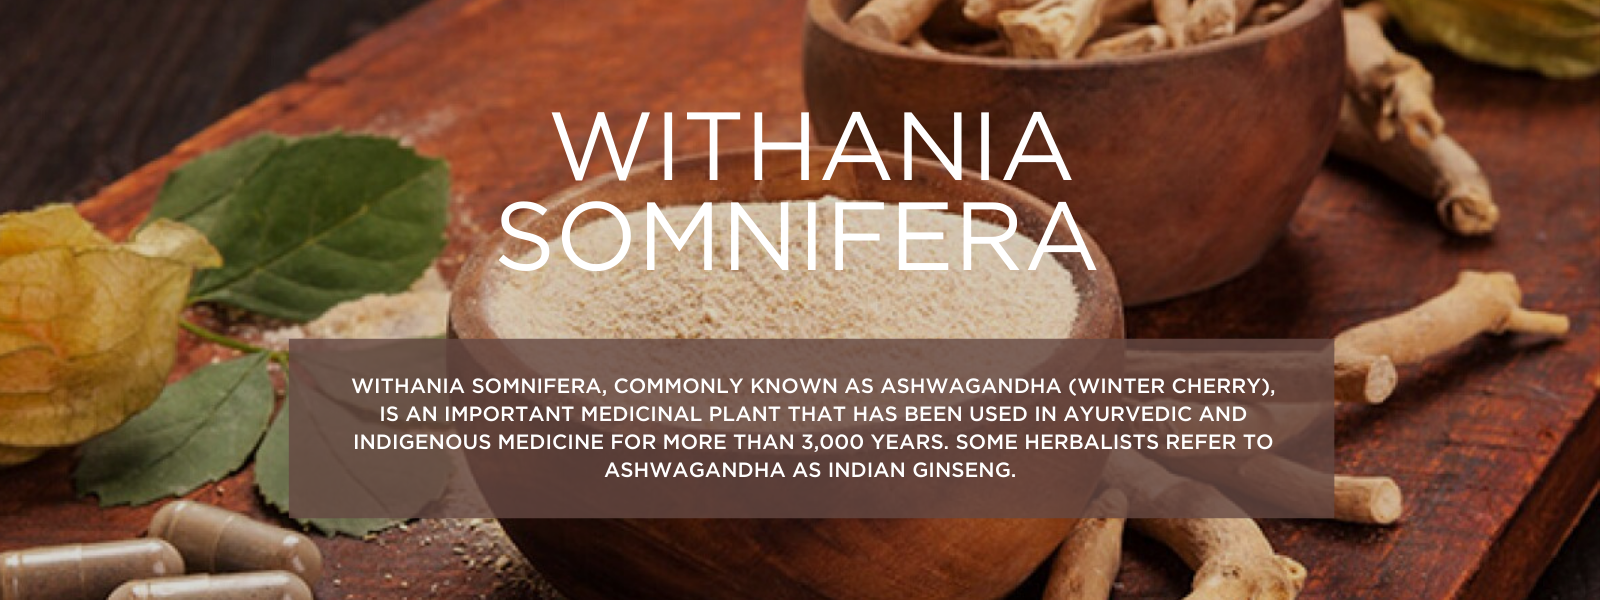 Withania Somnifera- Health Benefits, Uses and Important Facts